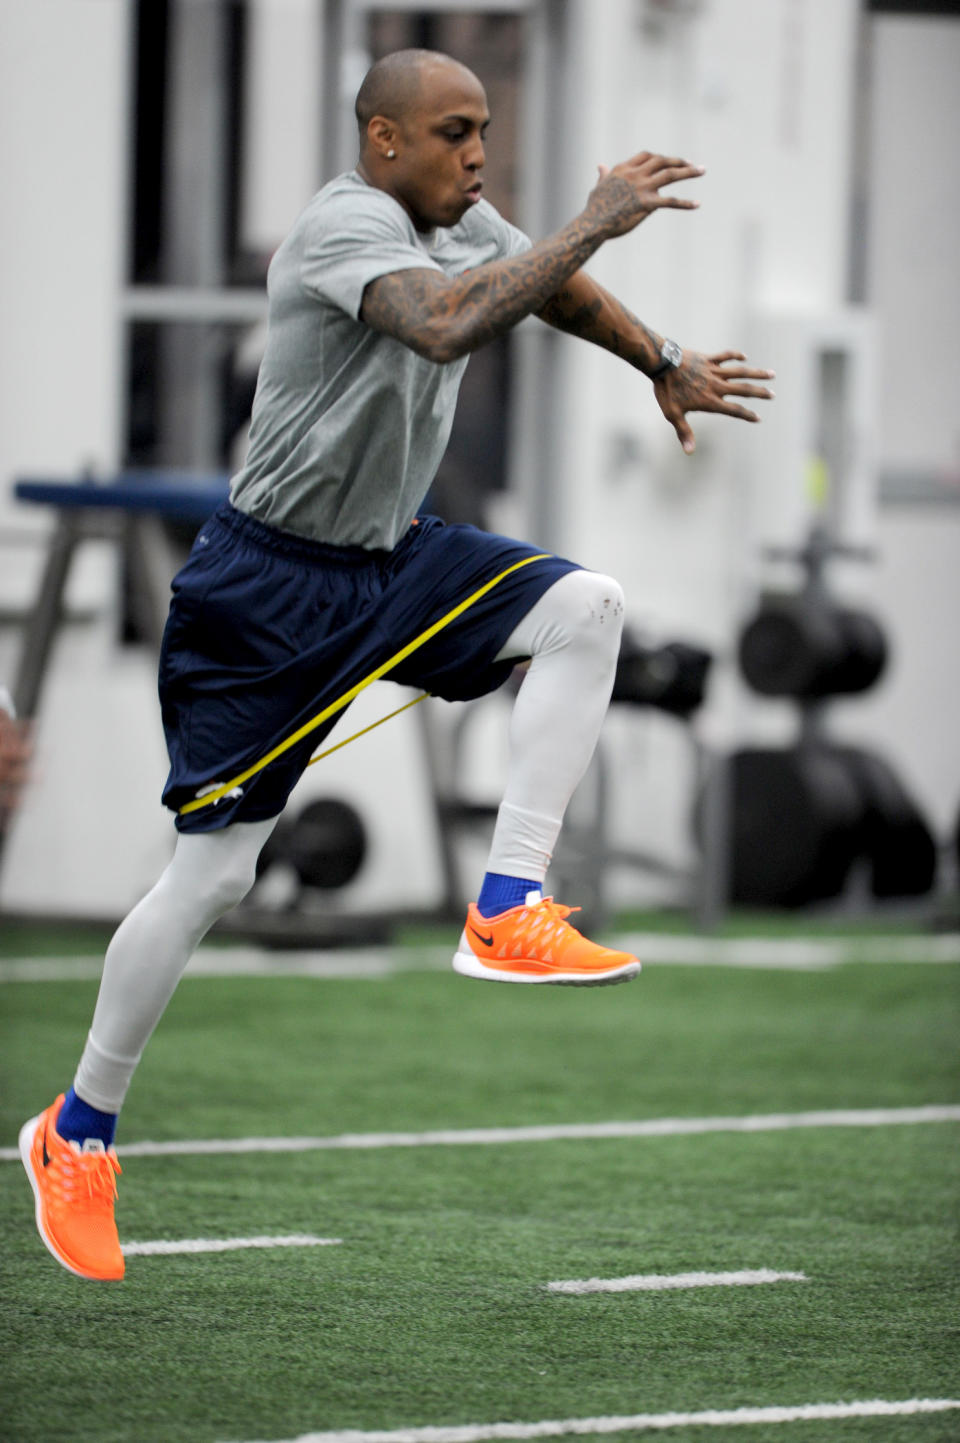 This photo provided by the Denver Broncos shows wide receiver Andre Caldwell working out during an offseason training session at the NFL football teams training facility in Englewood, Colo., on Monday, April 21, 2014. (AP Photo/Denver Broncos, Eric Lars Bakke)